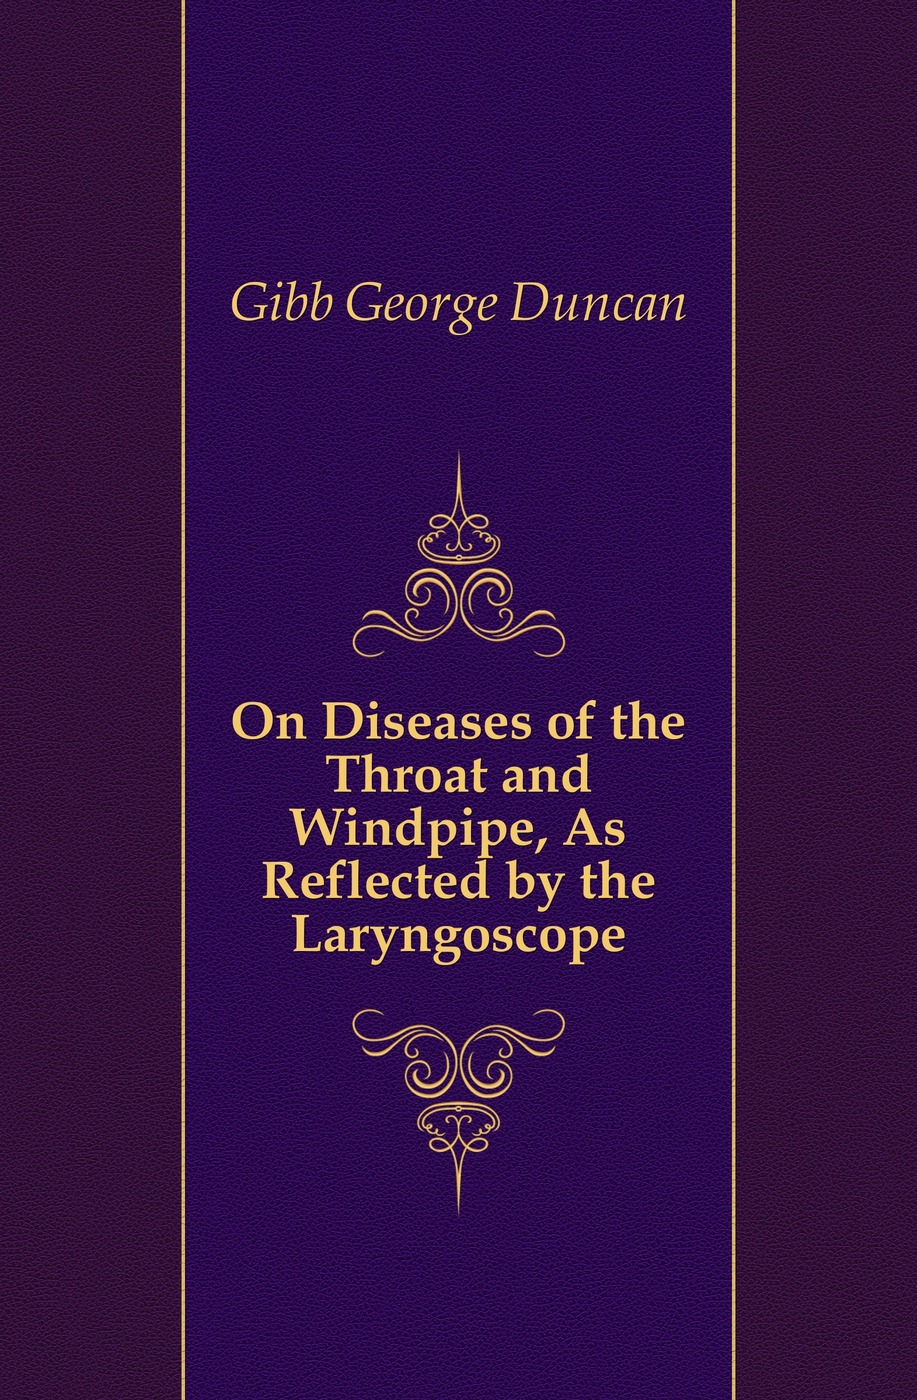 On Diseases of the Throat and Windpipe, As Reflected by the Laryngoscope